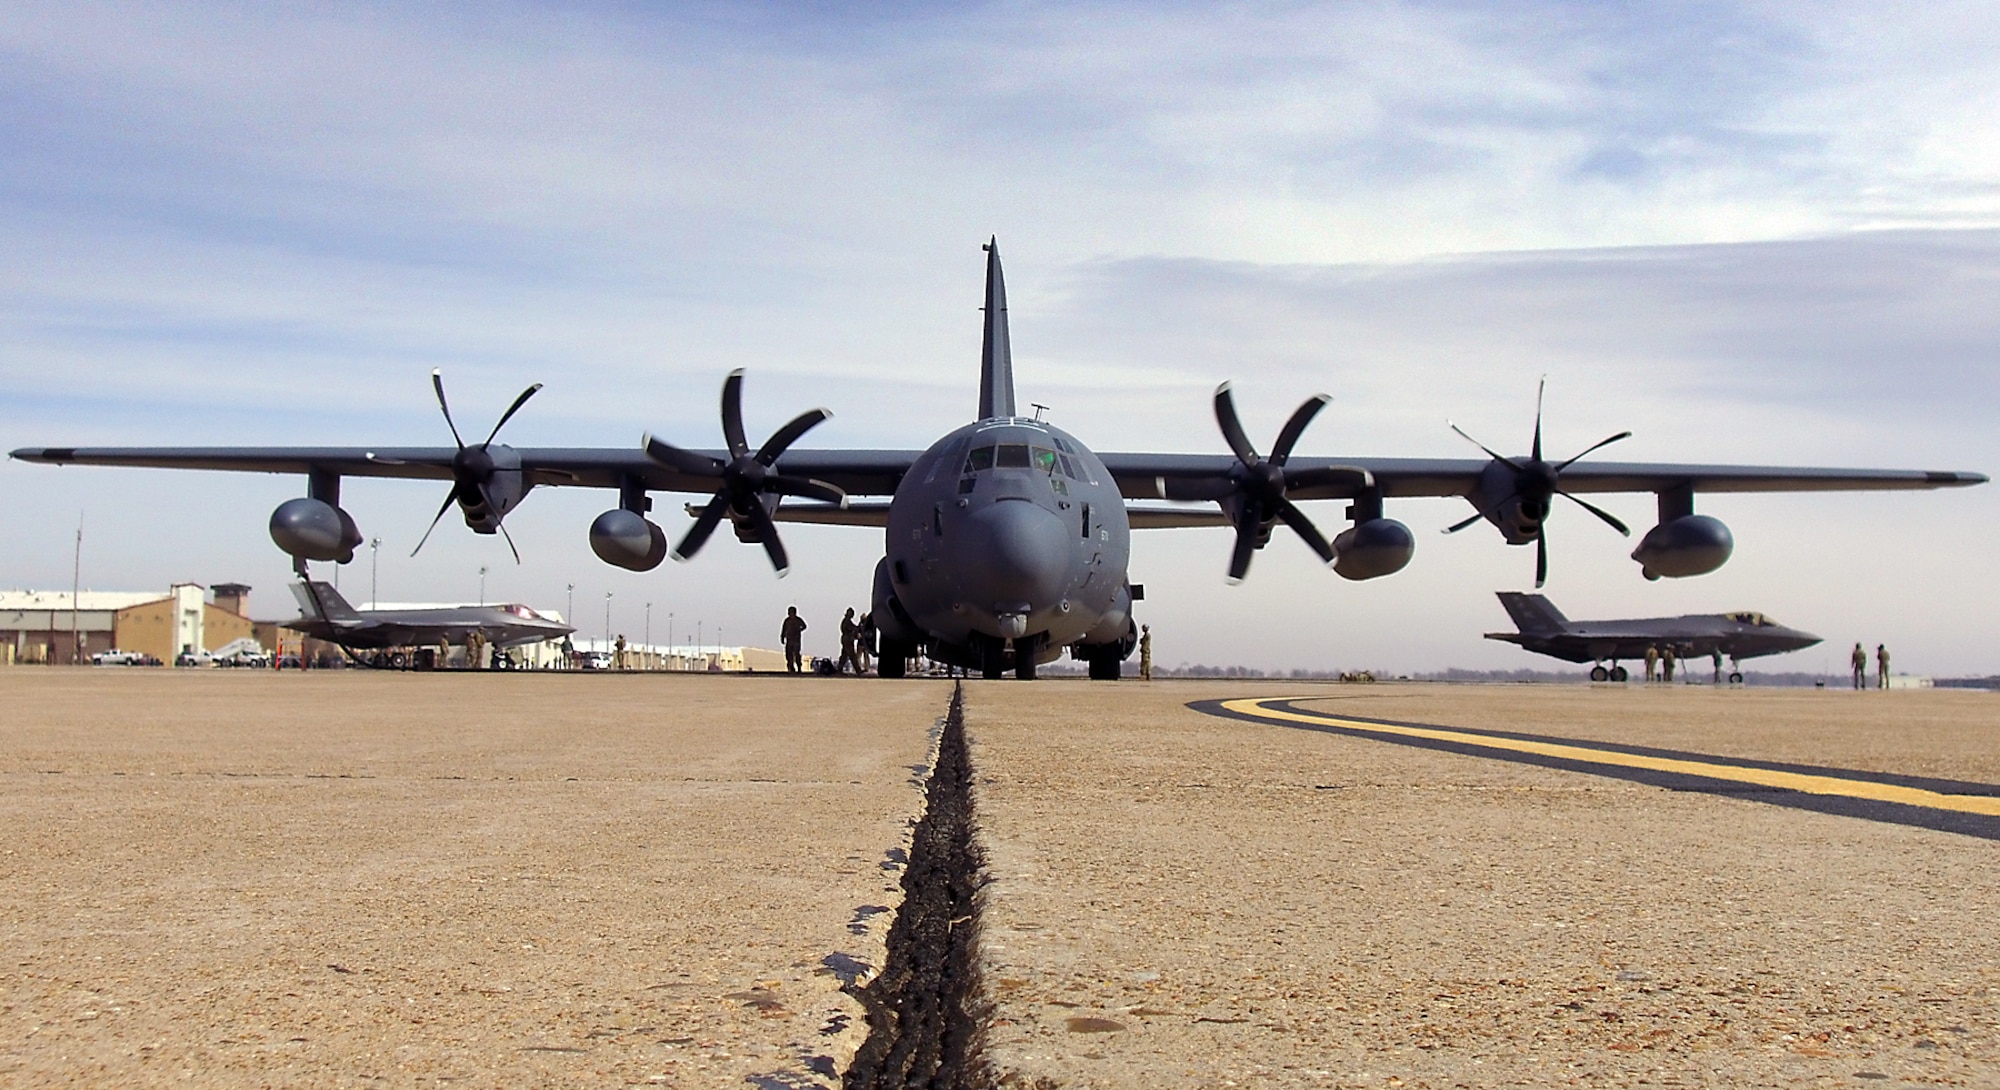 An MC-130J from the 9th Special Operations Squadron refuels two F-35A Lightning IIs from the 388th Fighter Wing at Cannon Air Force Base, N.M., during a Forward Air Refueling Point training exercise Feb. 27. This is the first time refueling operations between an MC-130J and an F-35 have been practiced. (U.S. Air Force photo by Micah Garbarino)